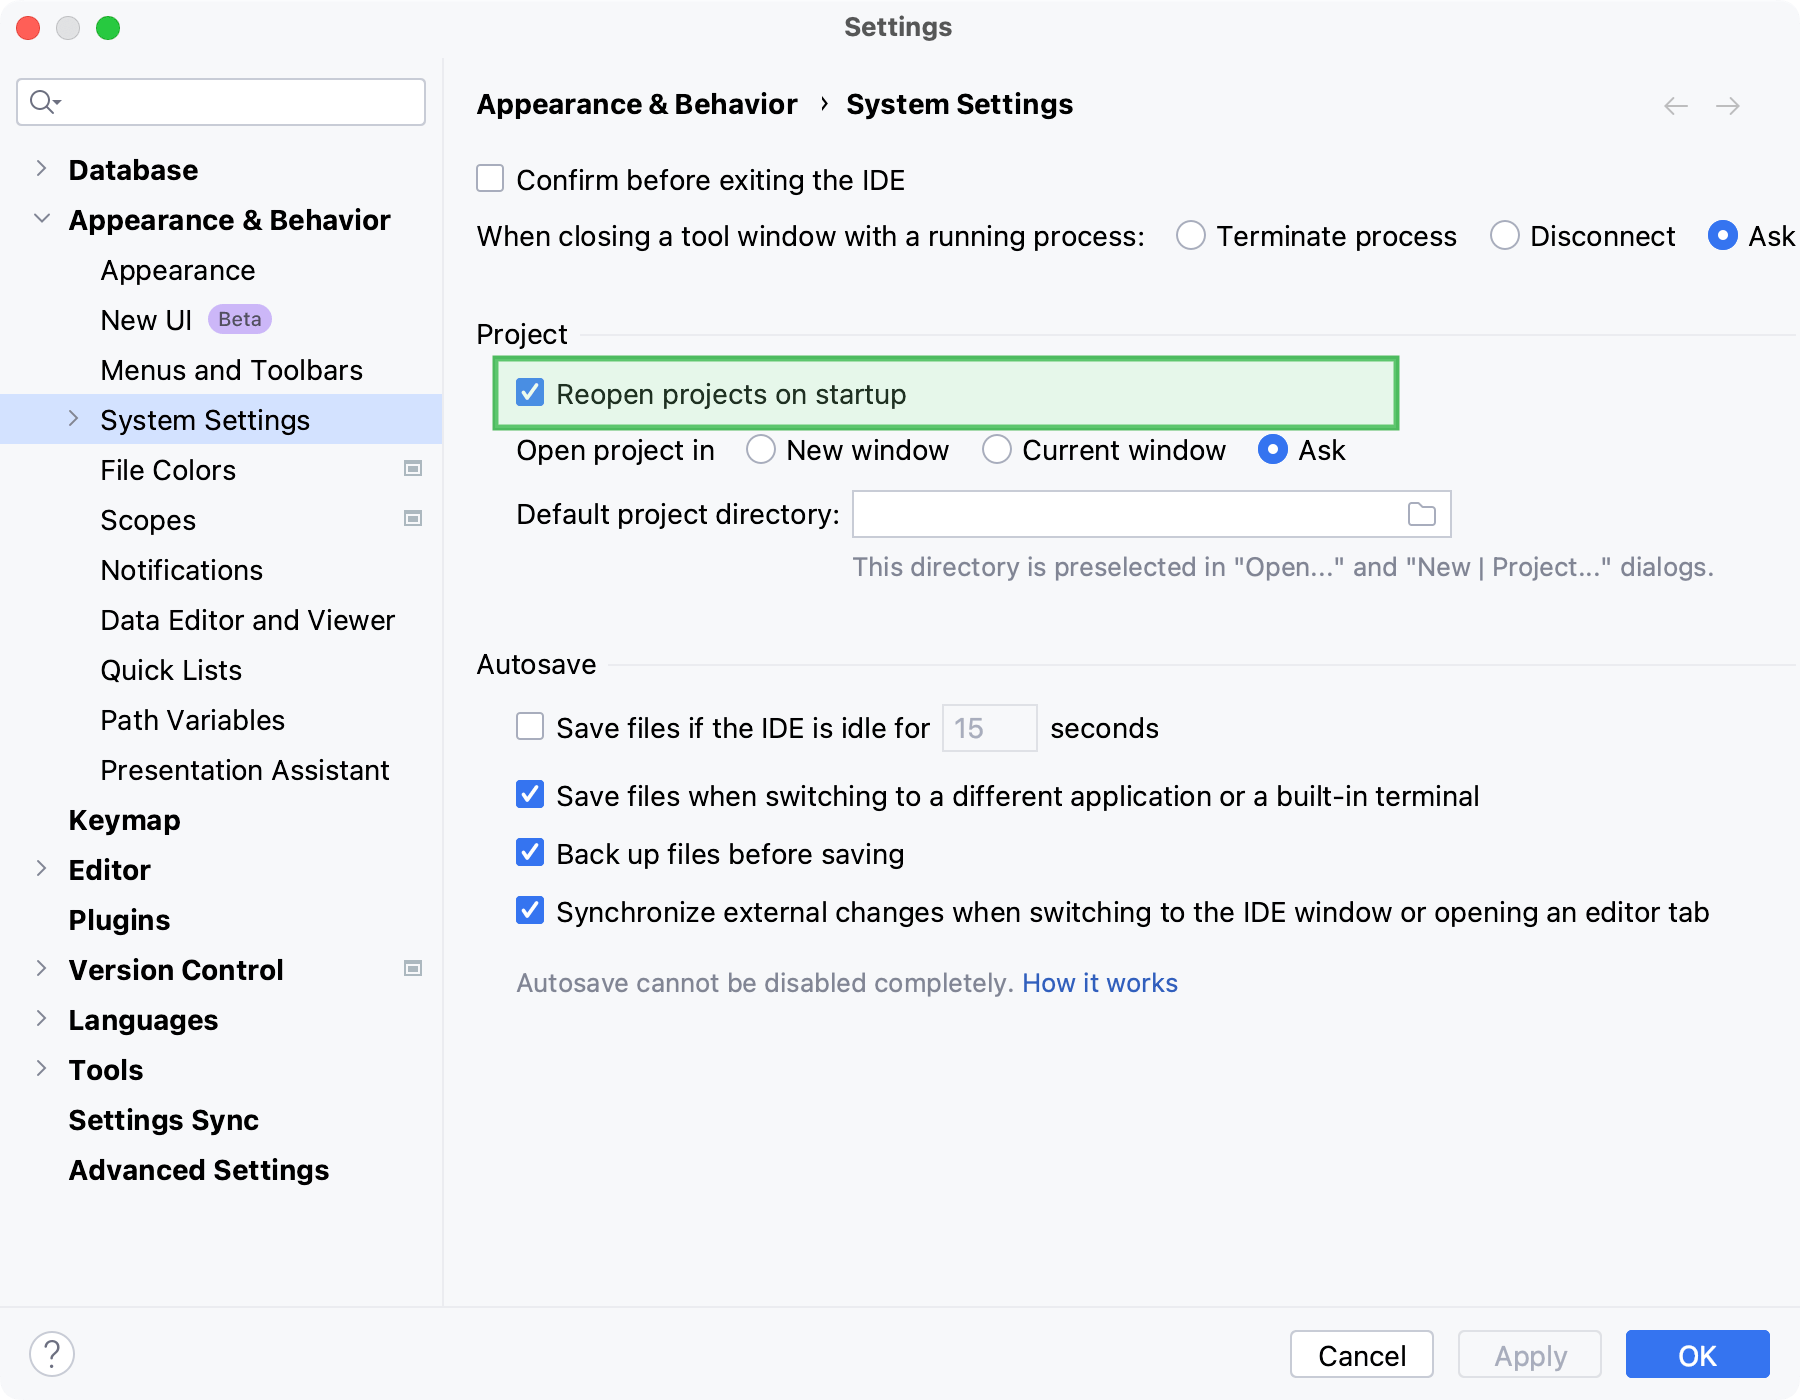 the System Settings page in Settings